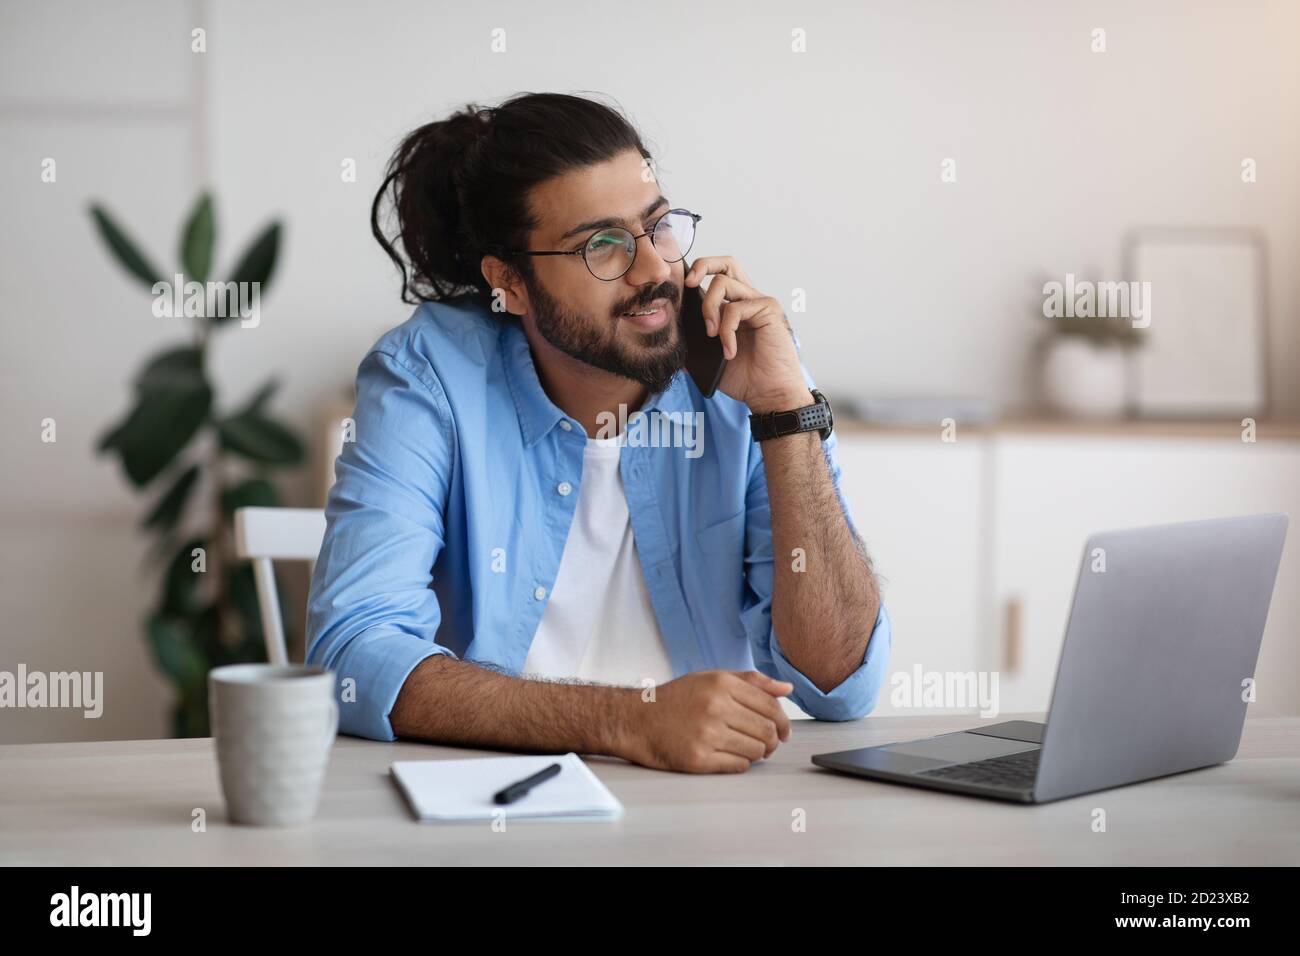 Millennial Indian Man Talking On Cellphone And Using Laptop At Home Office Stock Photo